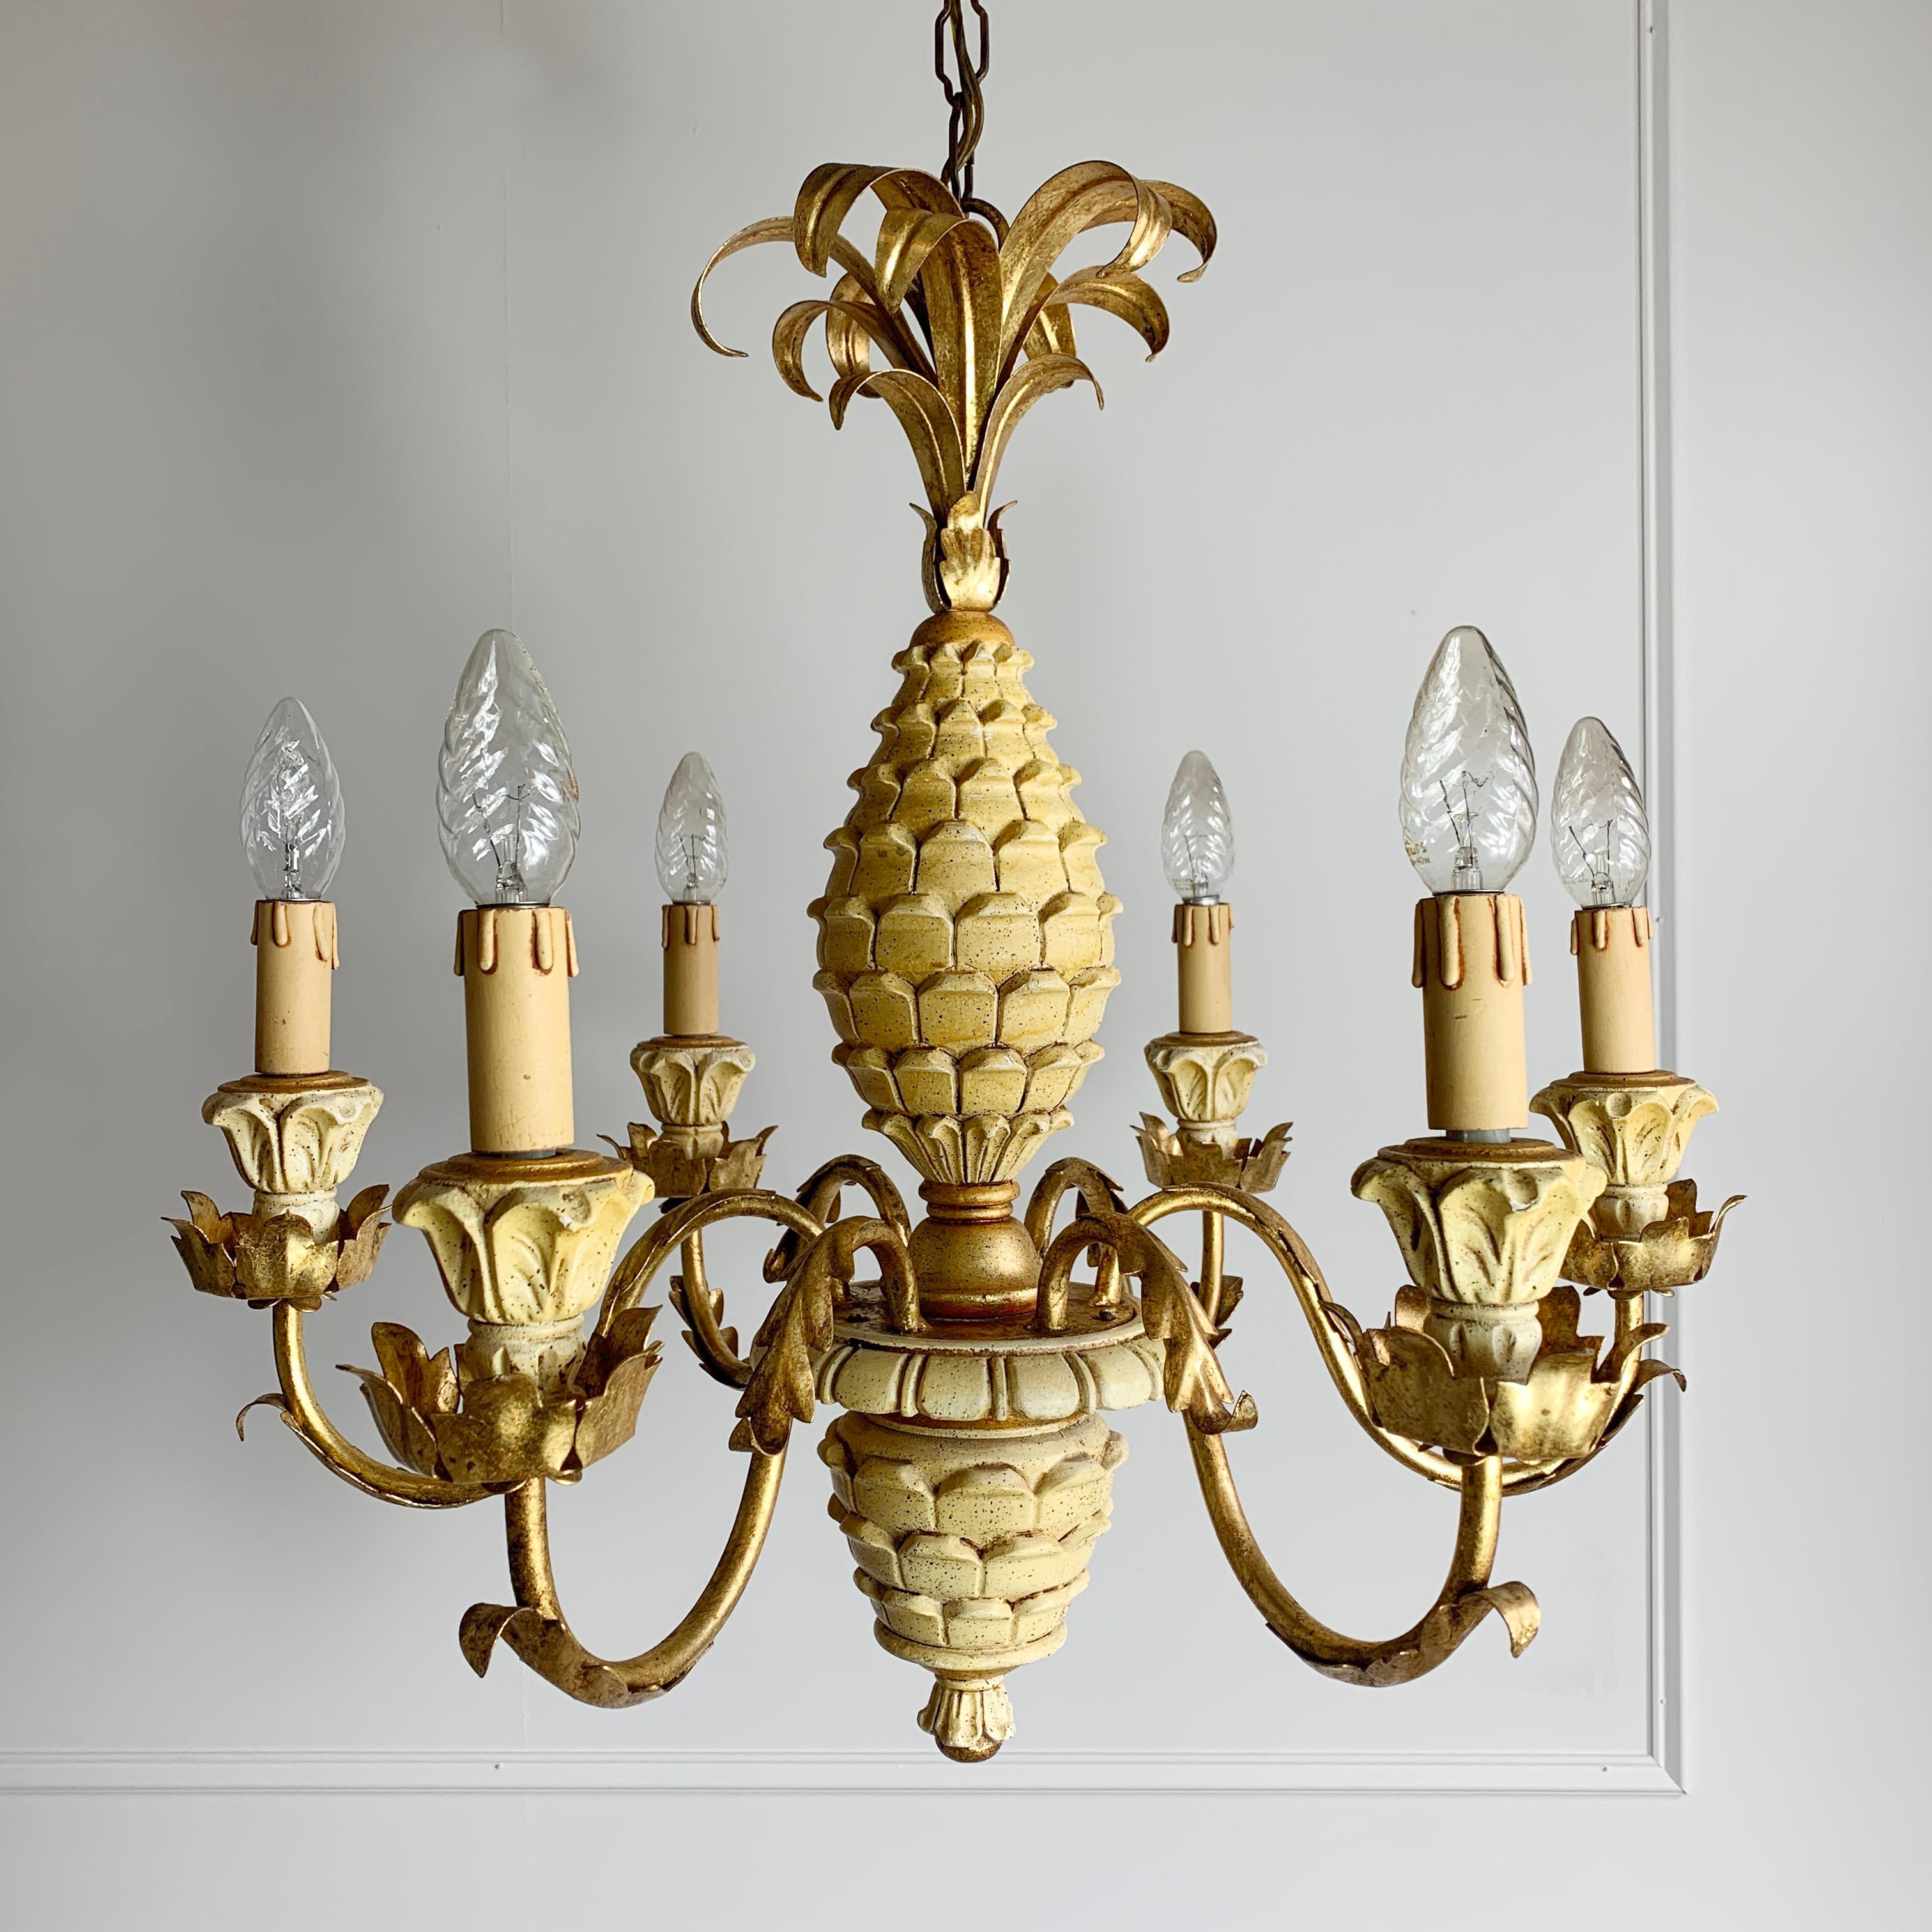 Beautiful carved pineapple chandelier with gilt acanthus leaf details and gilt fronds
Soft buttermilk tones with gilt
There are 6 arms each carrying a single lamp holder (e14)
The chain leads to the original git ceiling rose
Measures: 80cm total